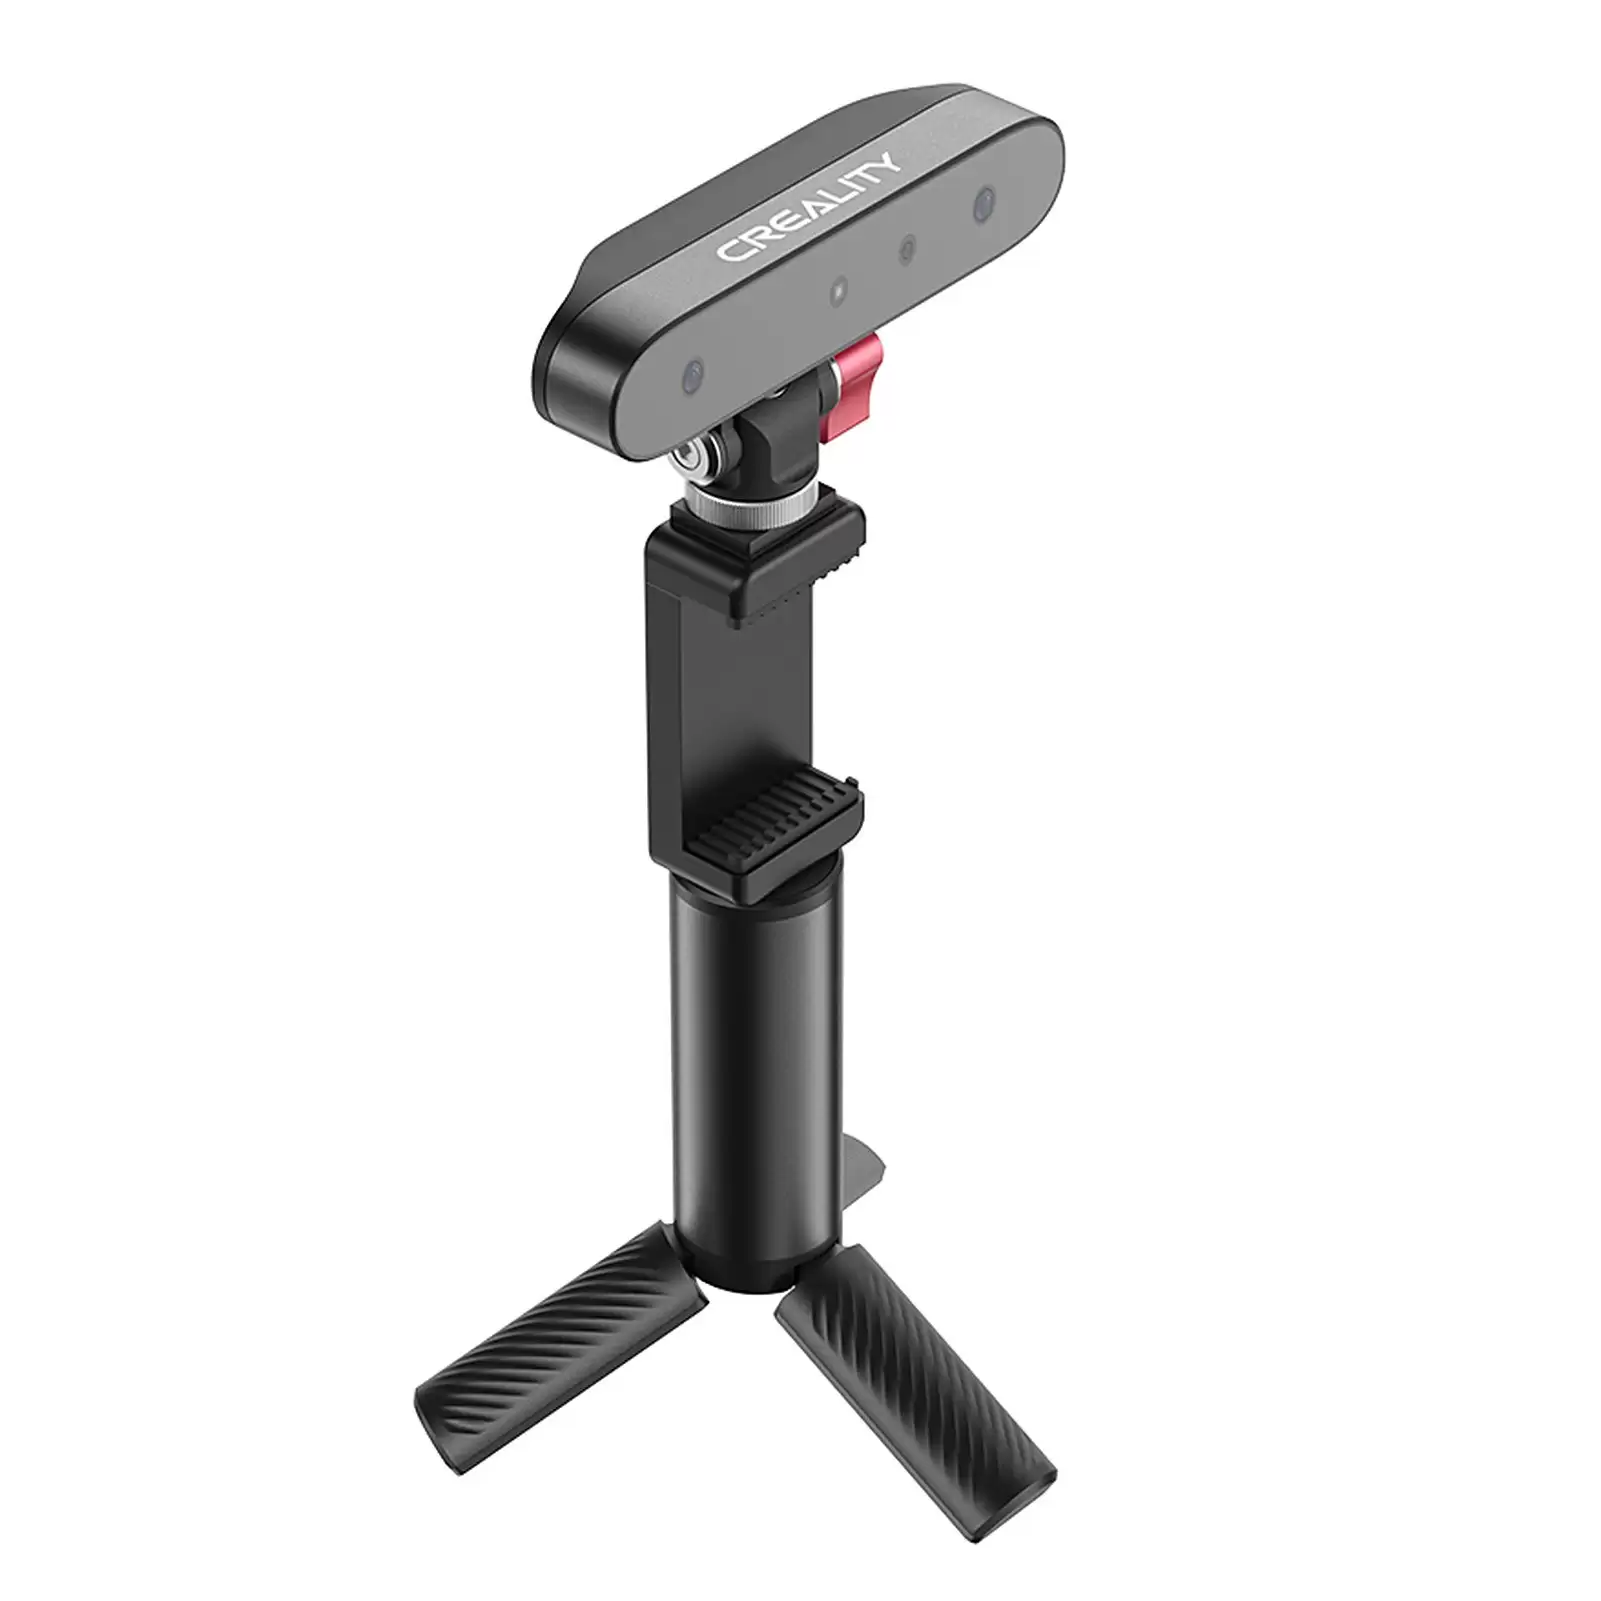 Order In Just $219 [eu Warehouse] Creality Cr-scan Ferret 3d Scanner